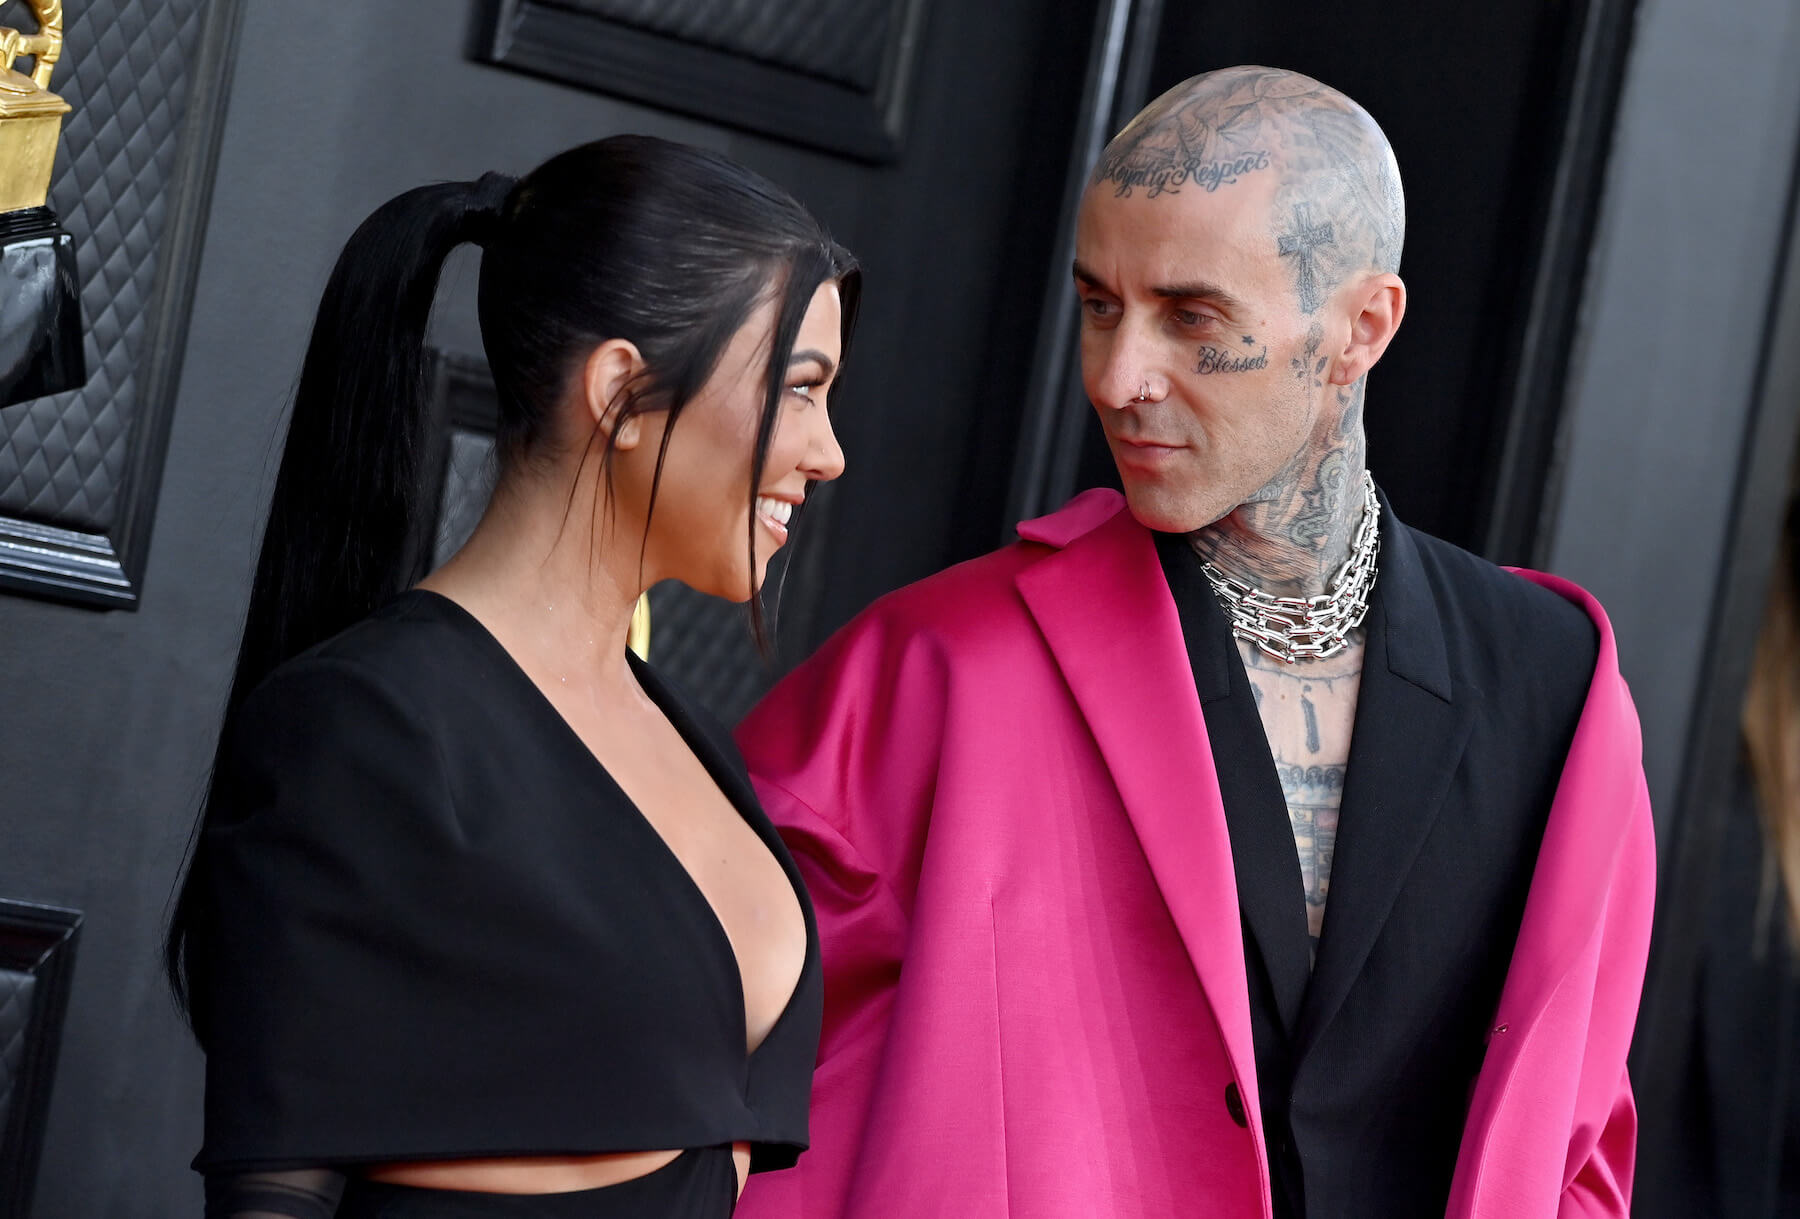 Kourtney Kardashian and Travis Barker looking at each other at an event